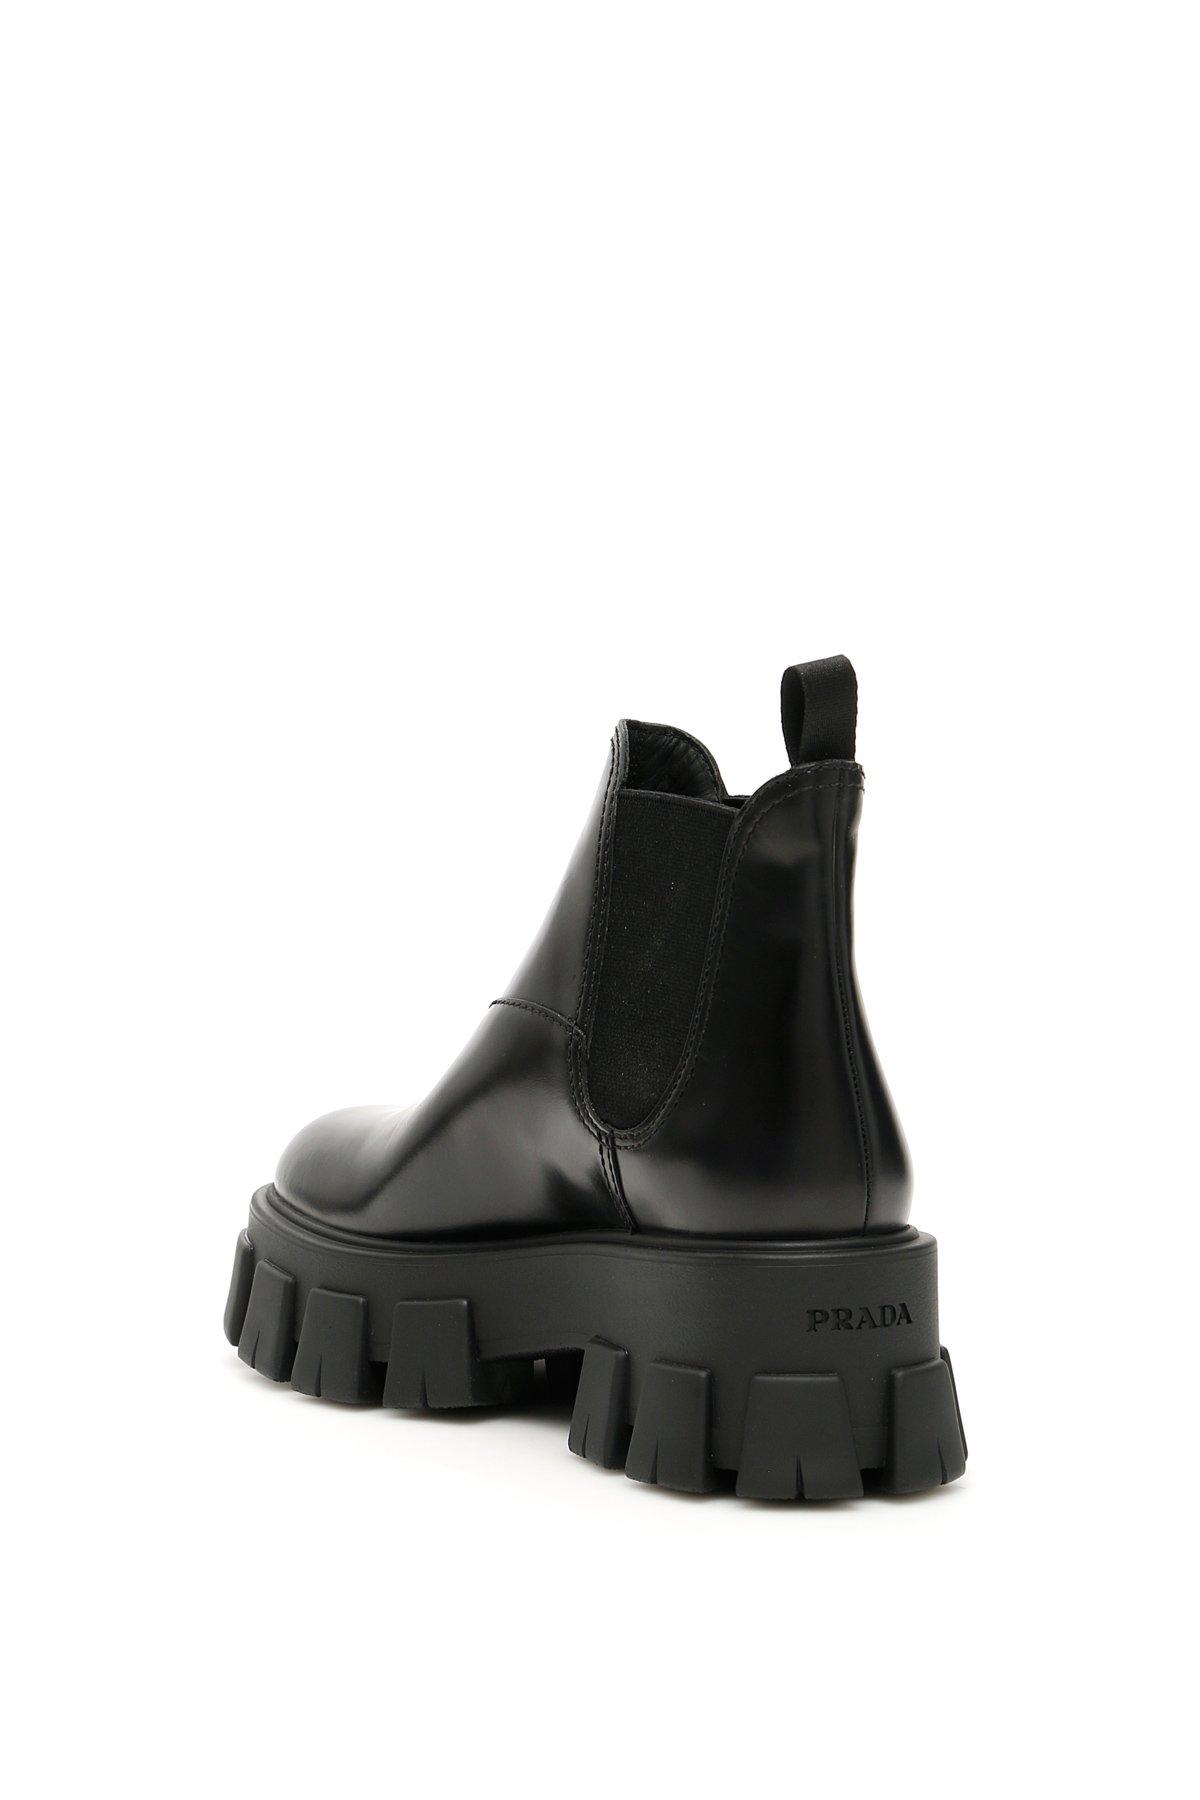 Prada Leather Monolith Brushed Calfskin Boots in Black | Lyst